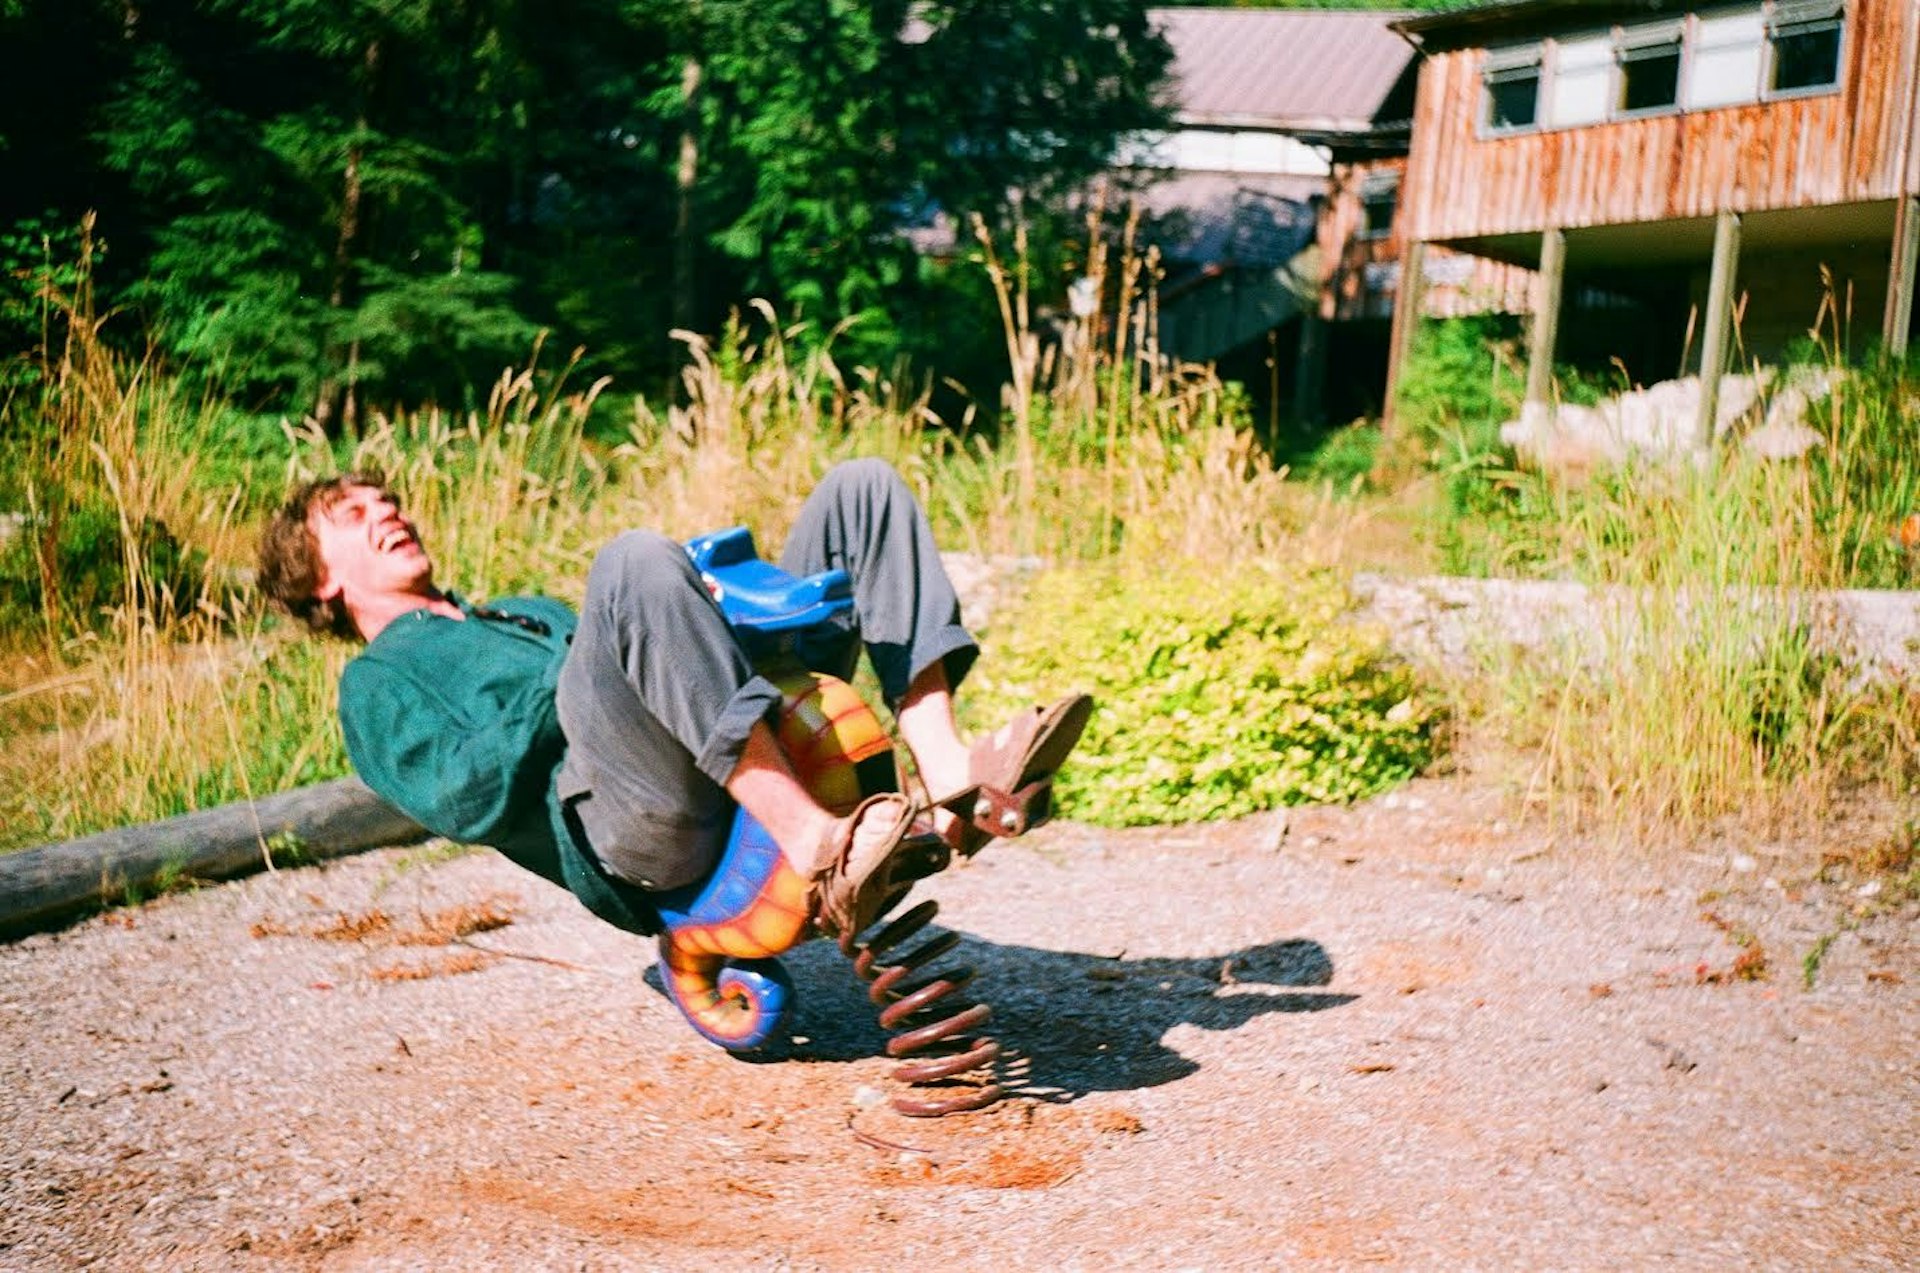 Eclectic feel: Sound tripping with Cosmo Sheldrake